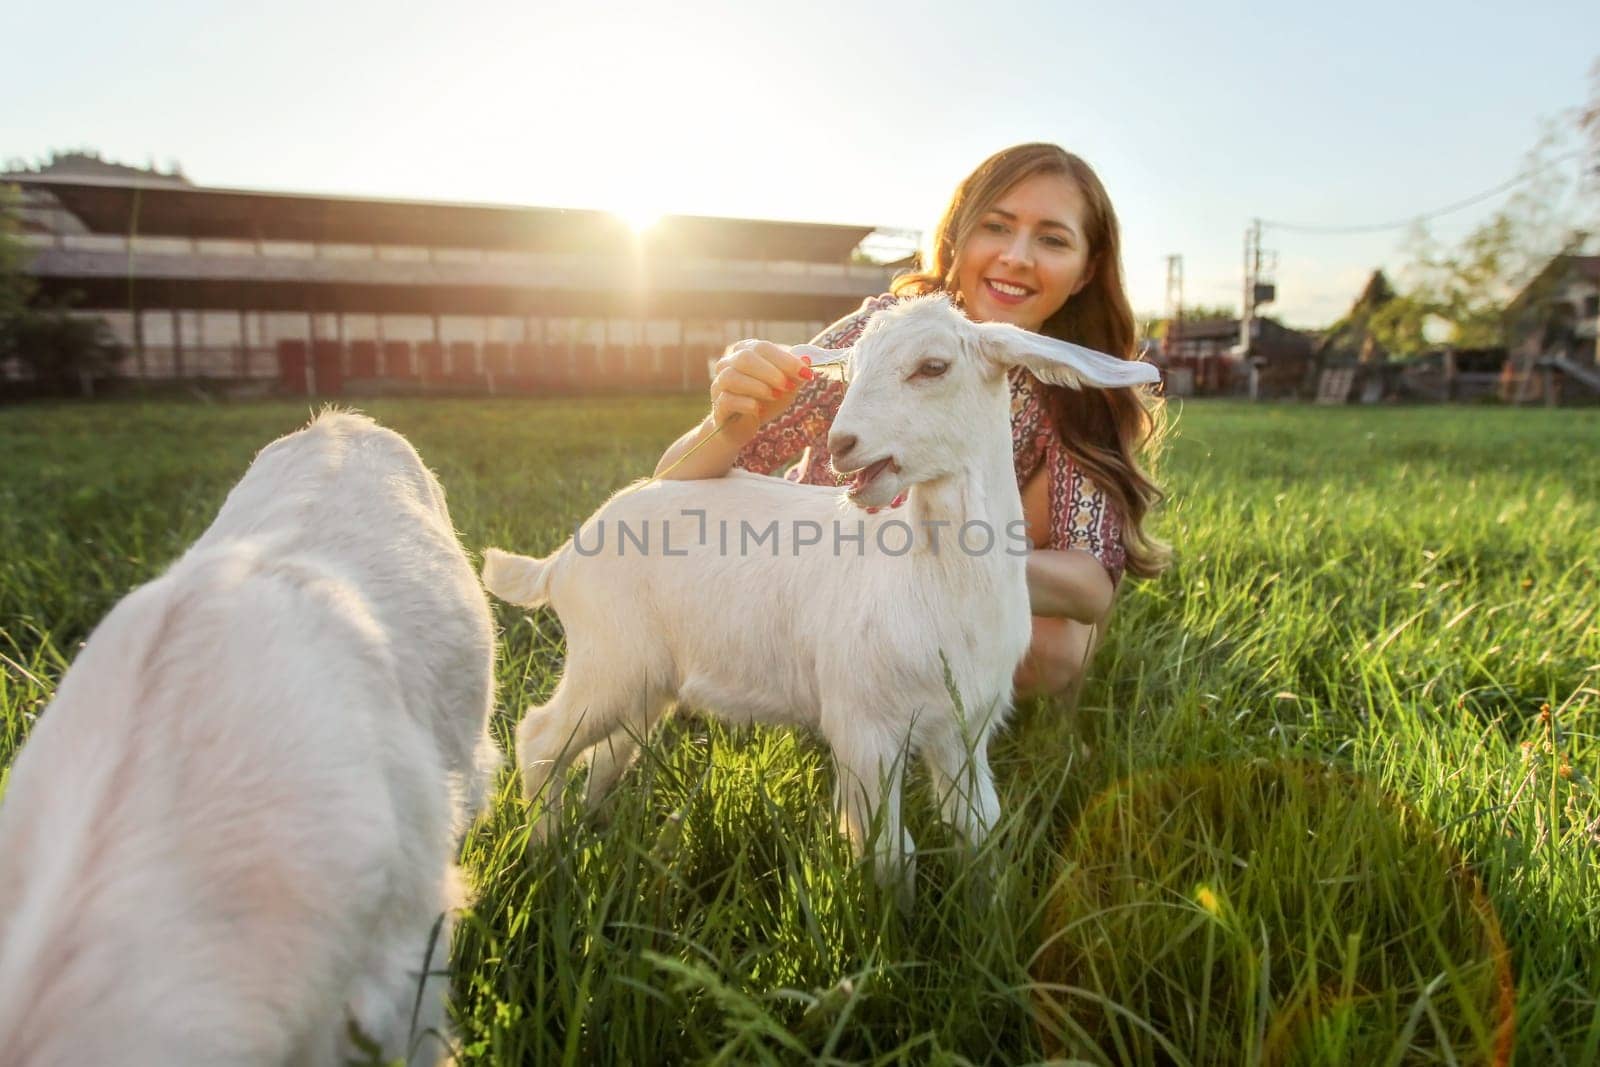 Young woman plays with goat kids, feeding them, sun shining over farm in background.